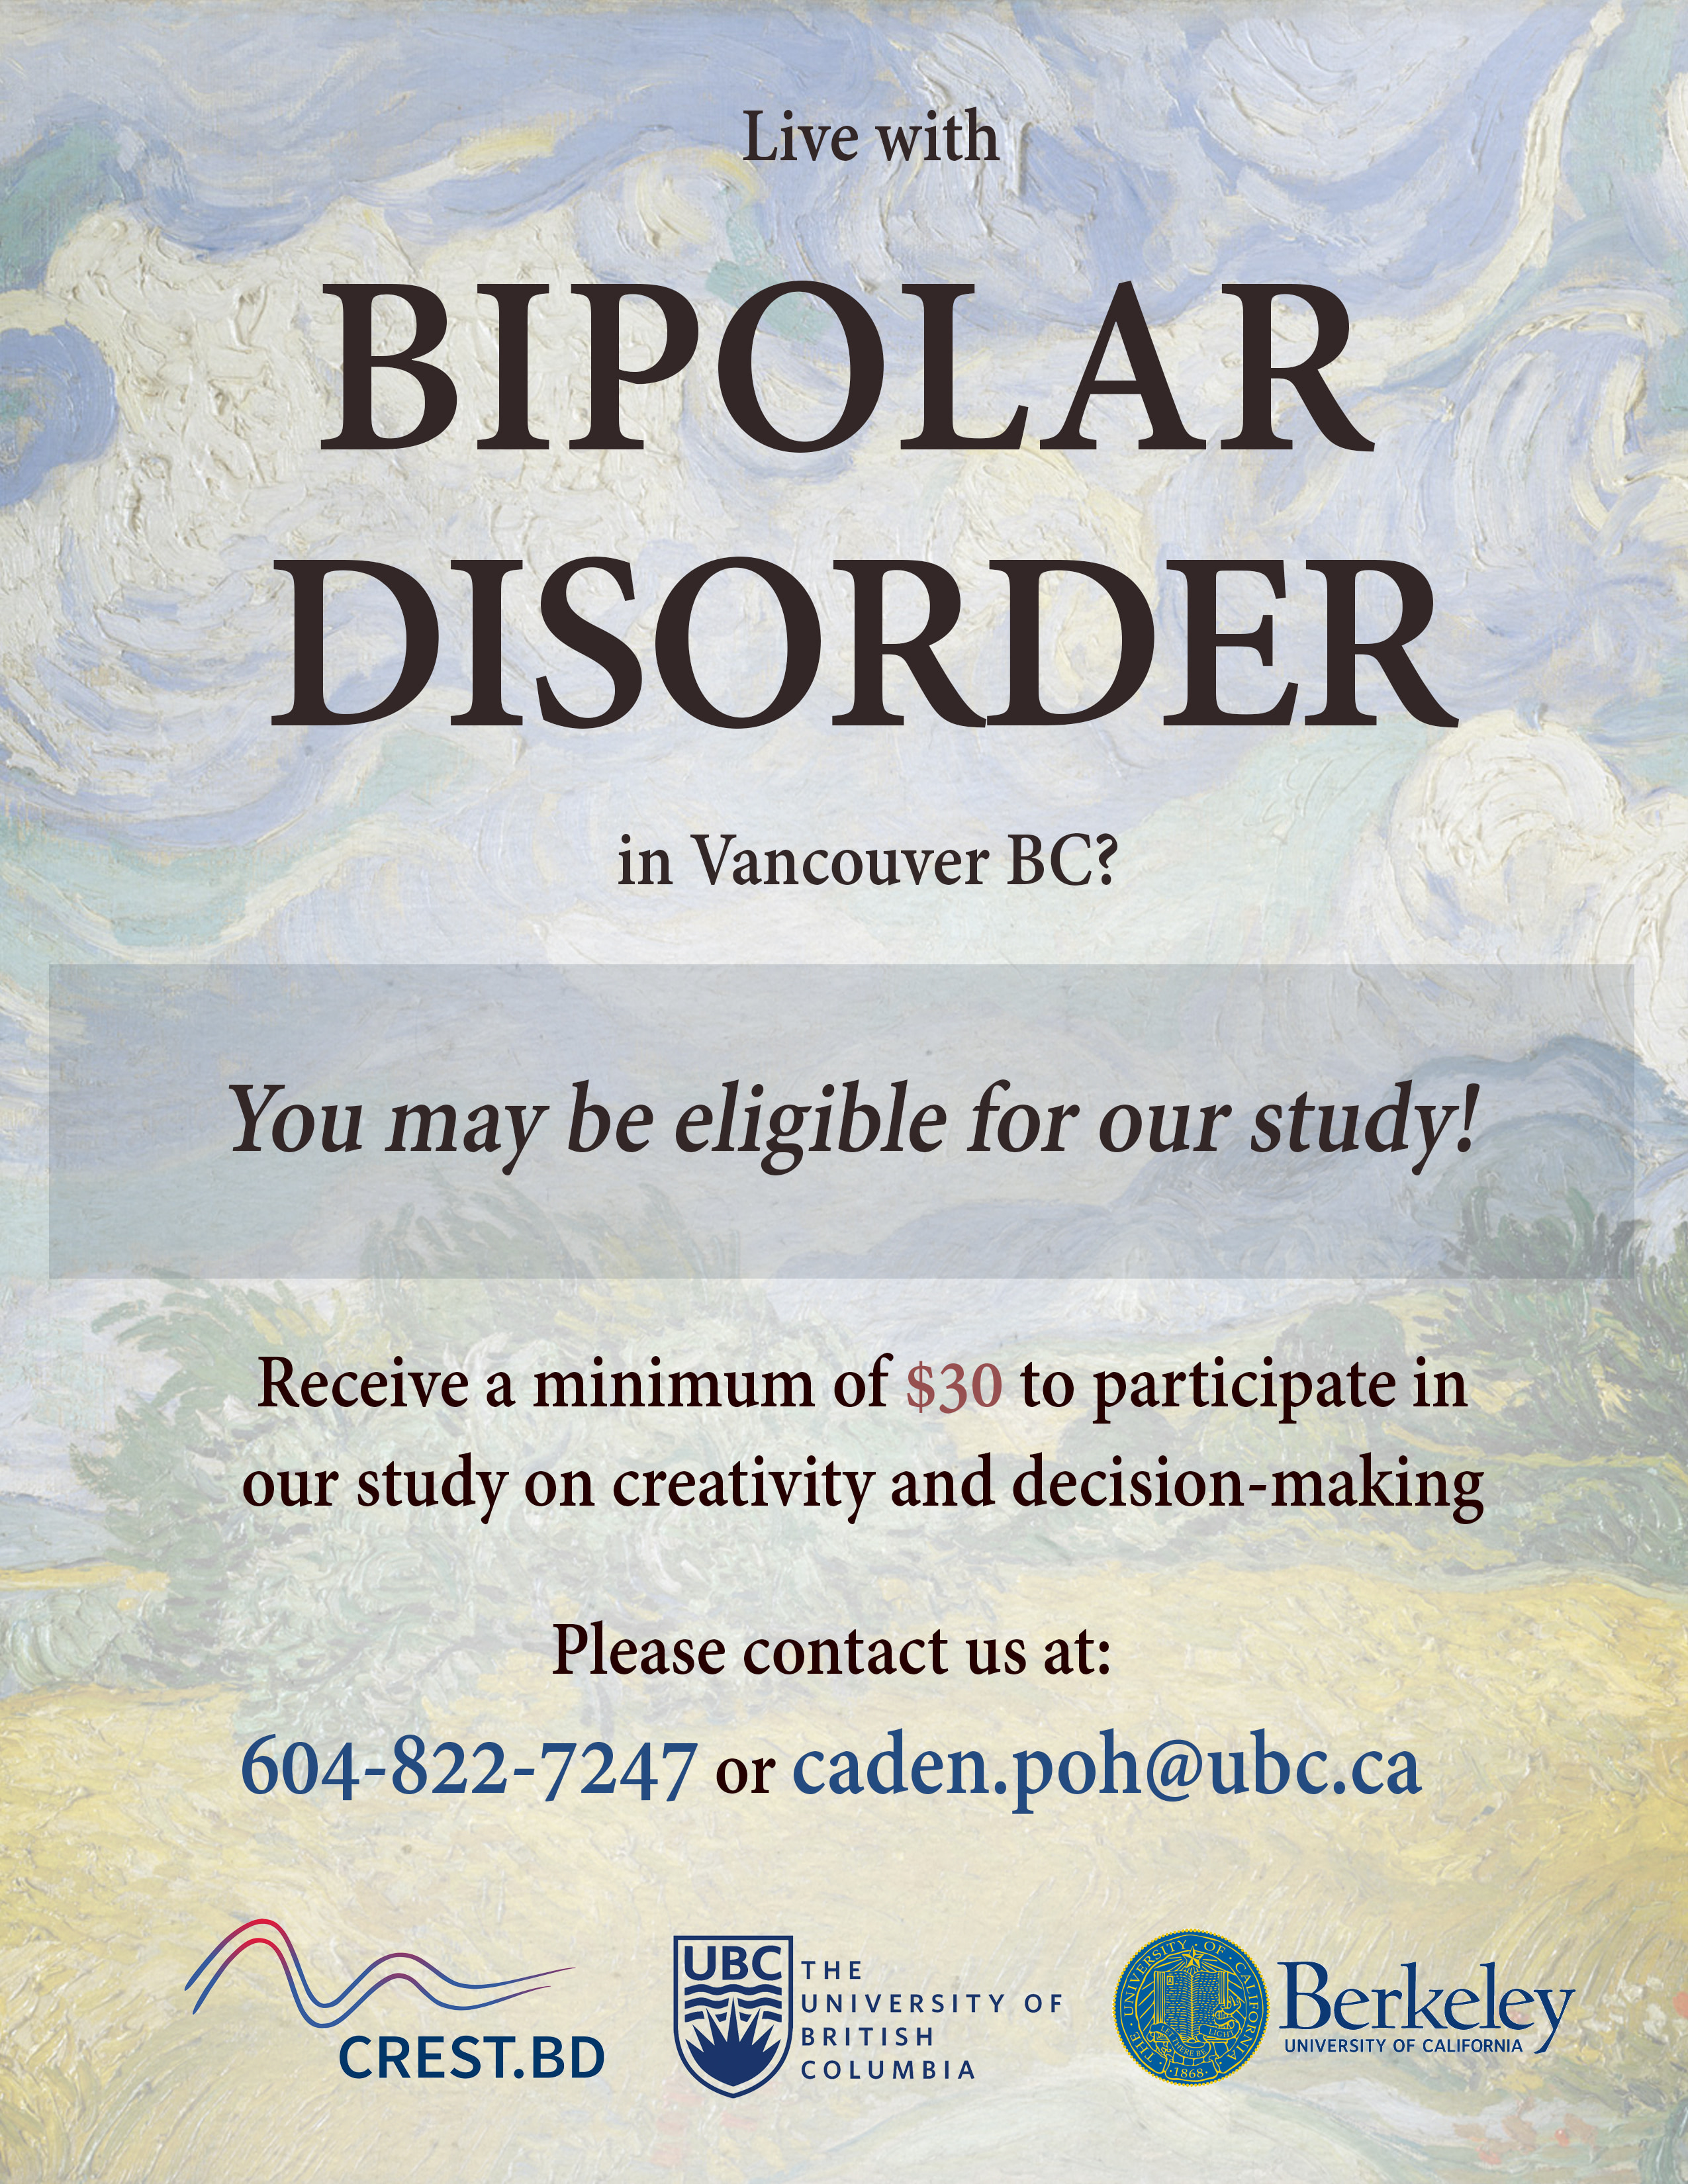 Living with BIPOLAR DISORDER? Join our new study on creativity!